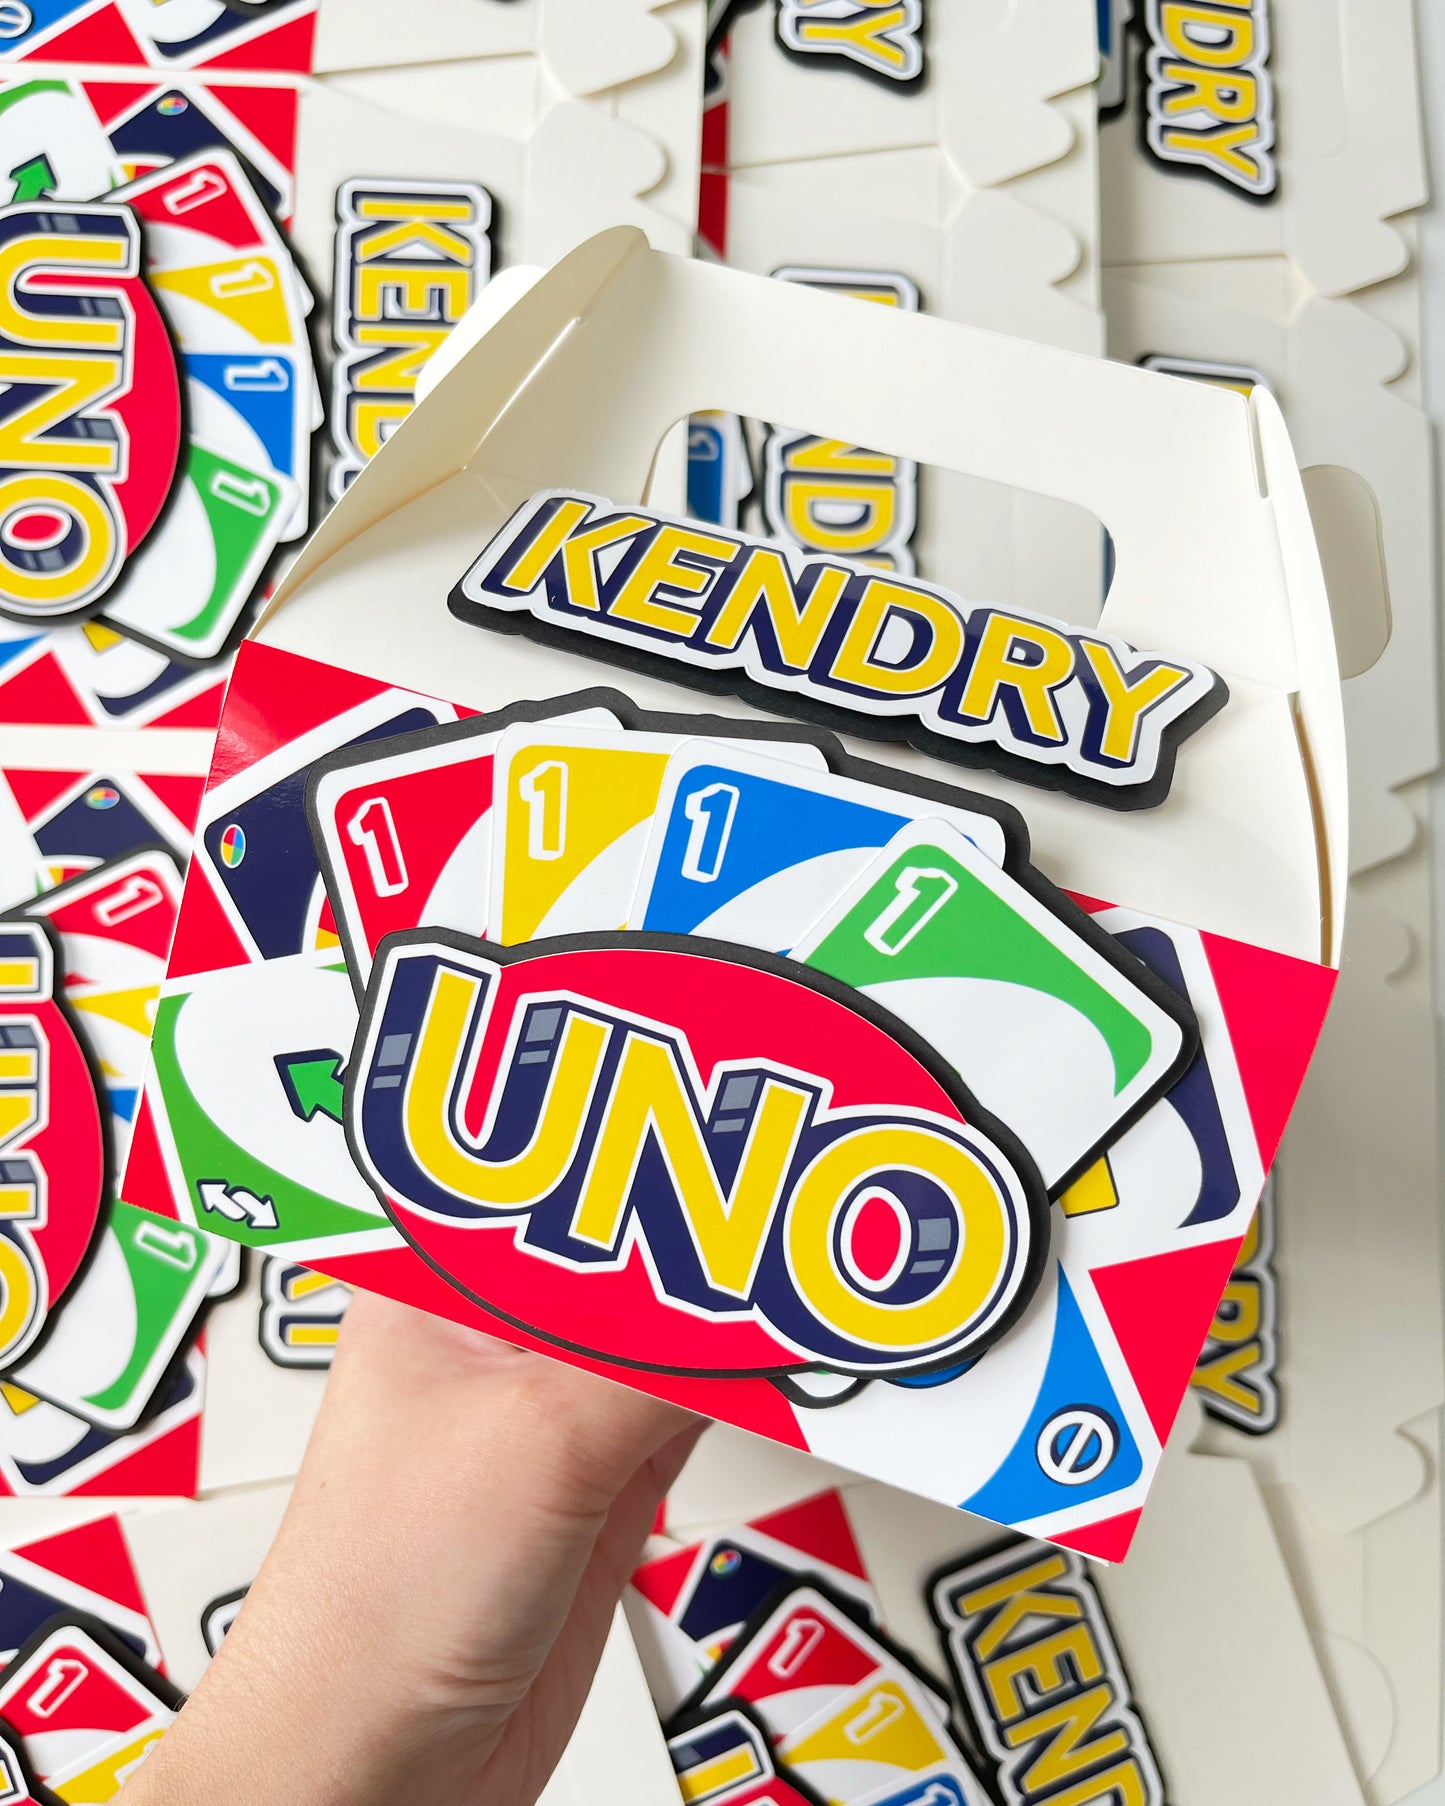 uno reverse, uno out, card games - Uno Reverse - Posters and Art Prints